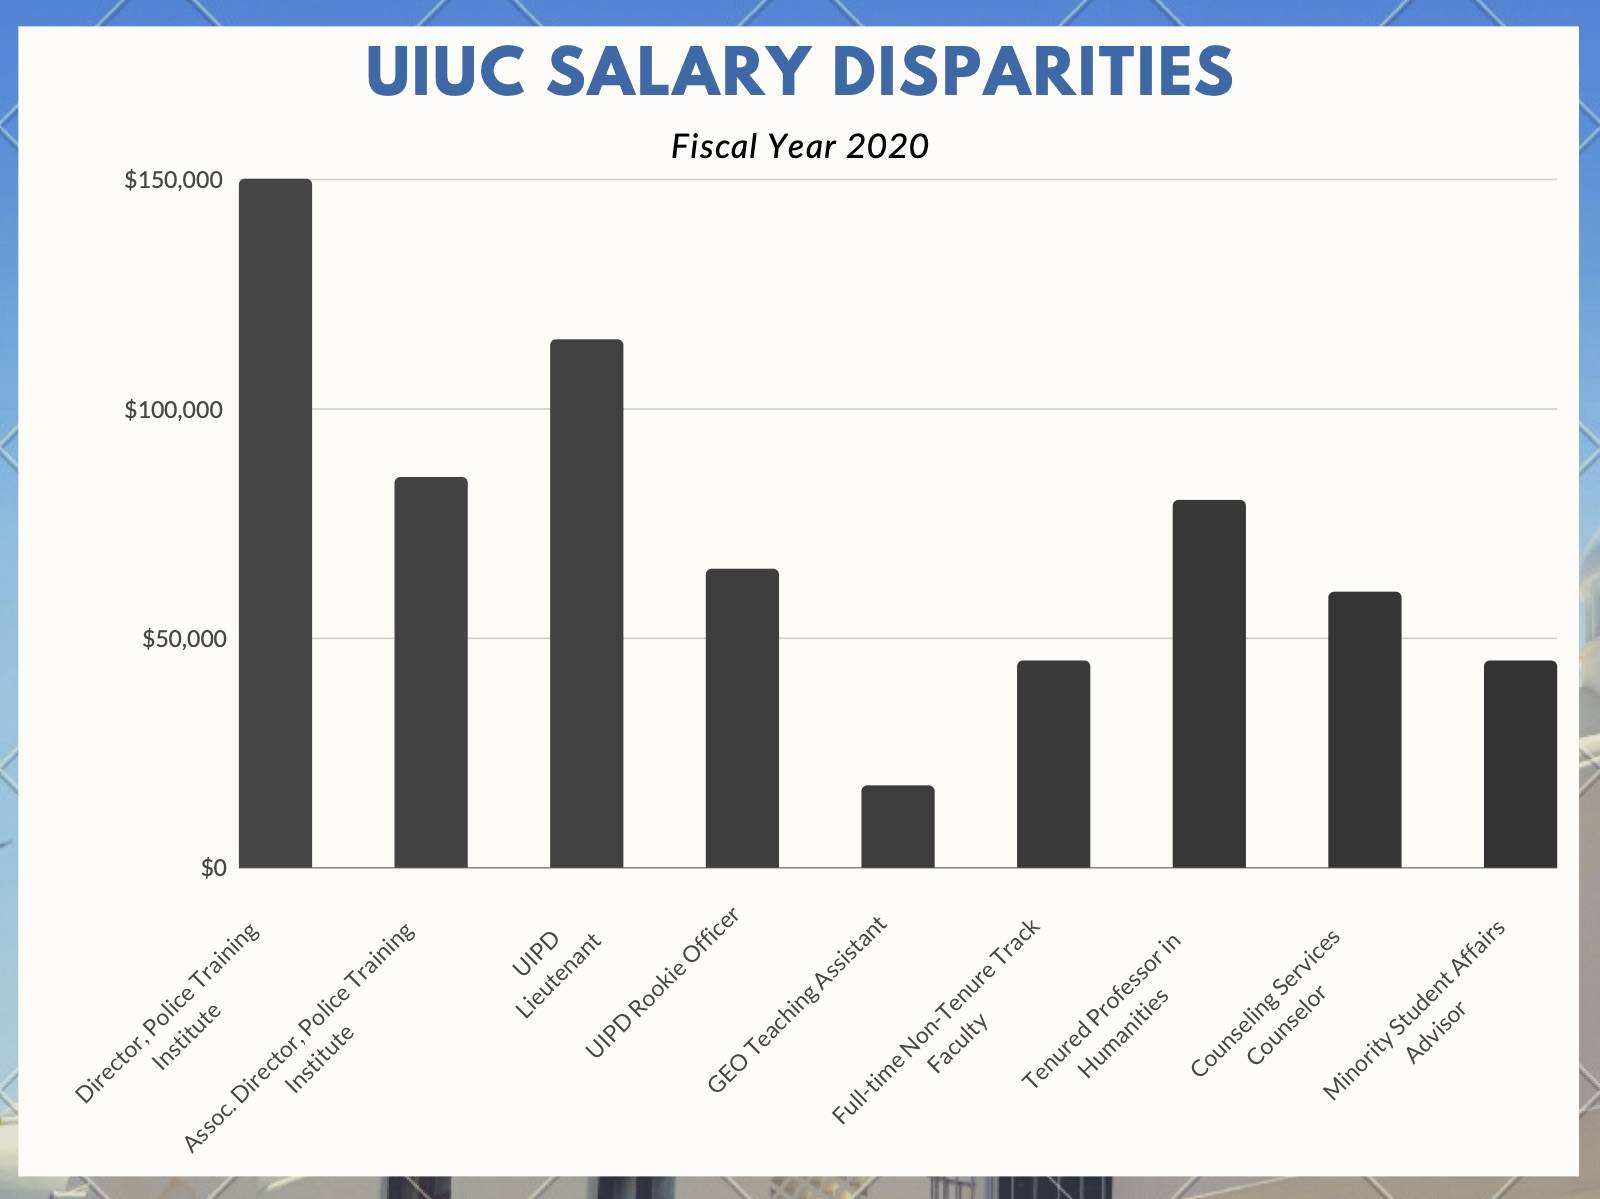 IMAGE: A bar graph showcasing UIUC Salary Disparaties for Fiscal Year 2020.